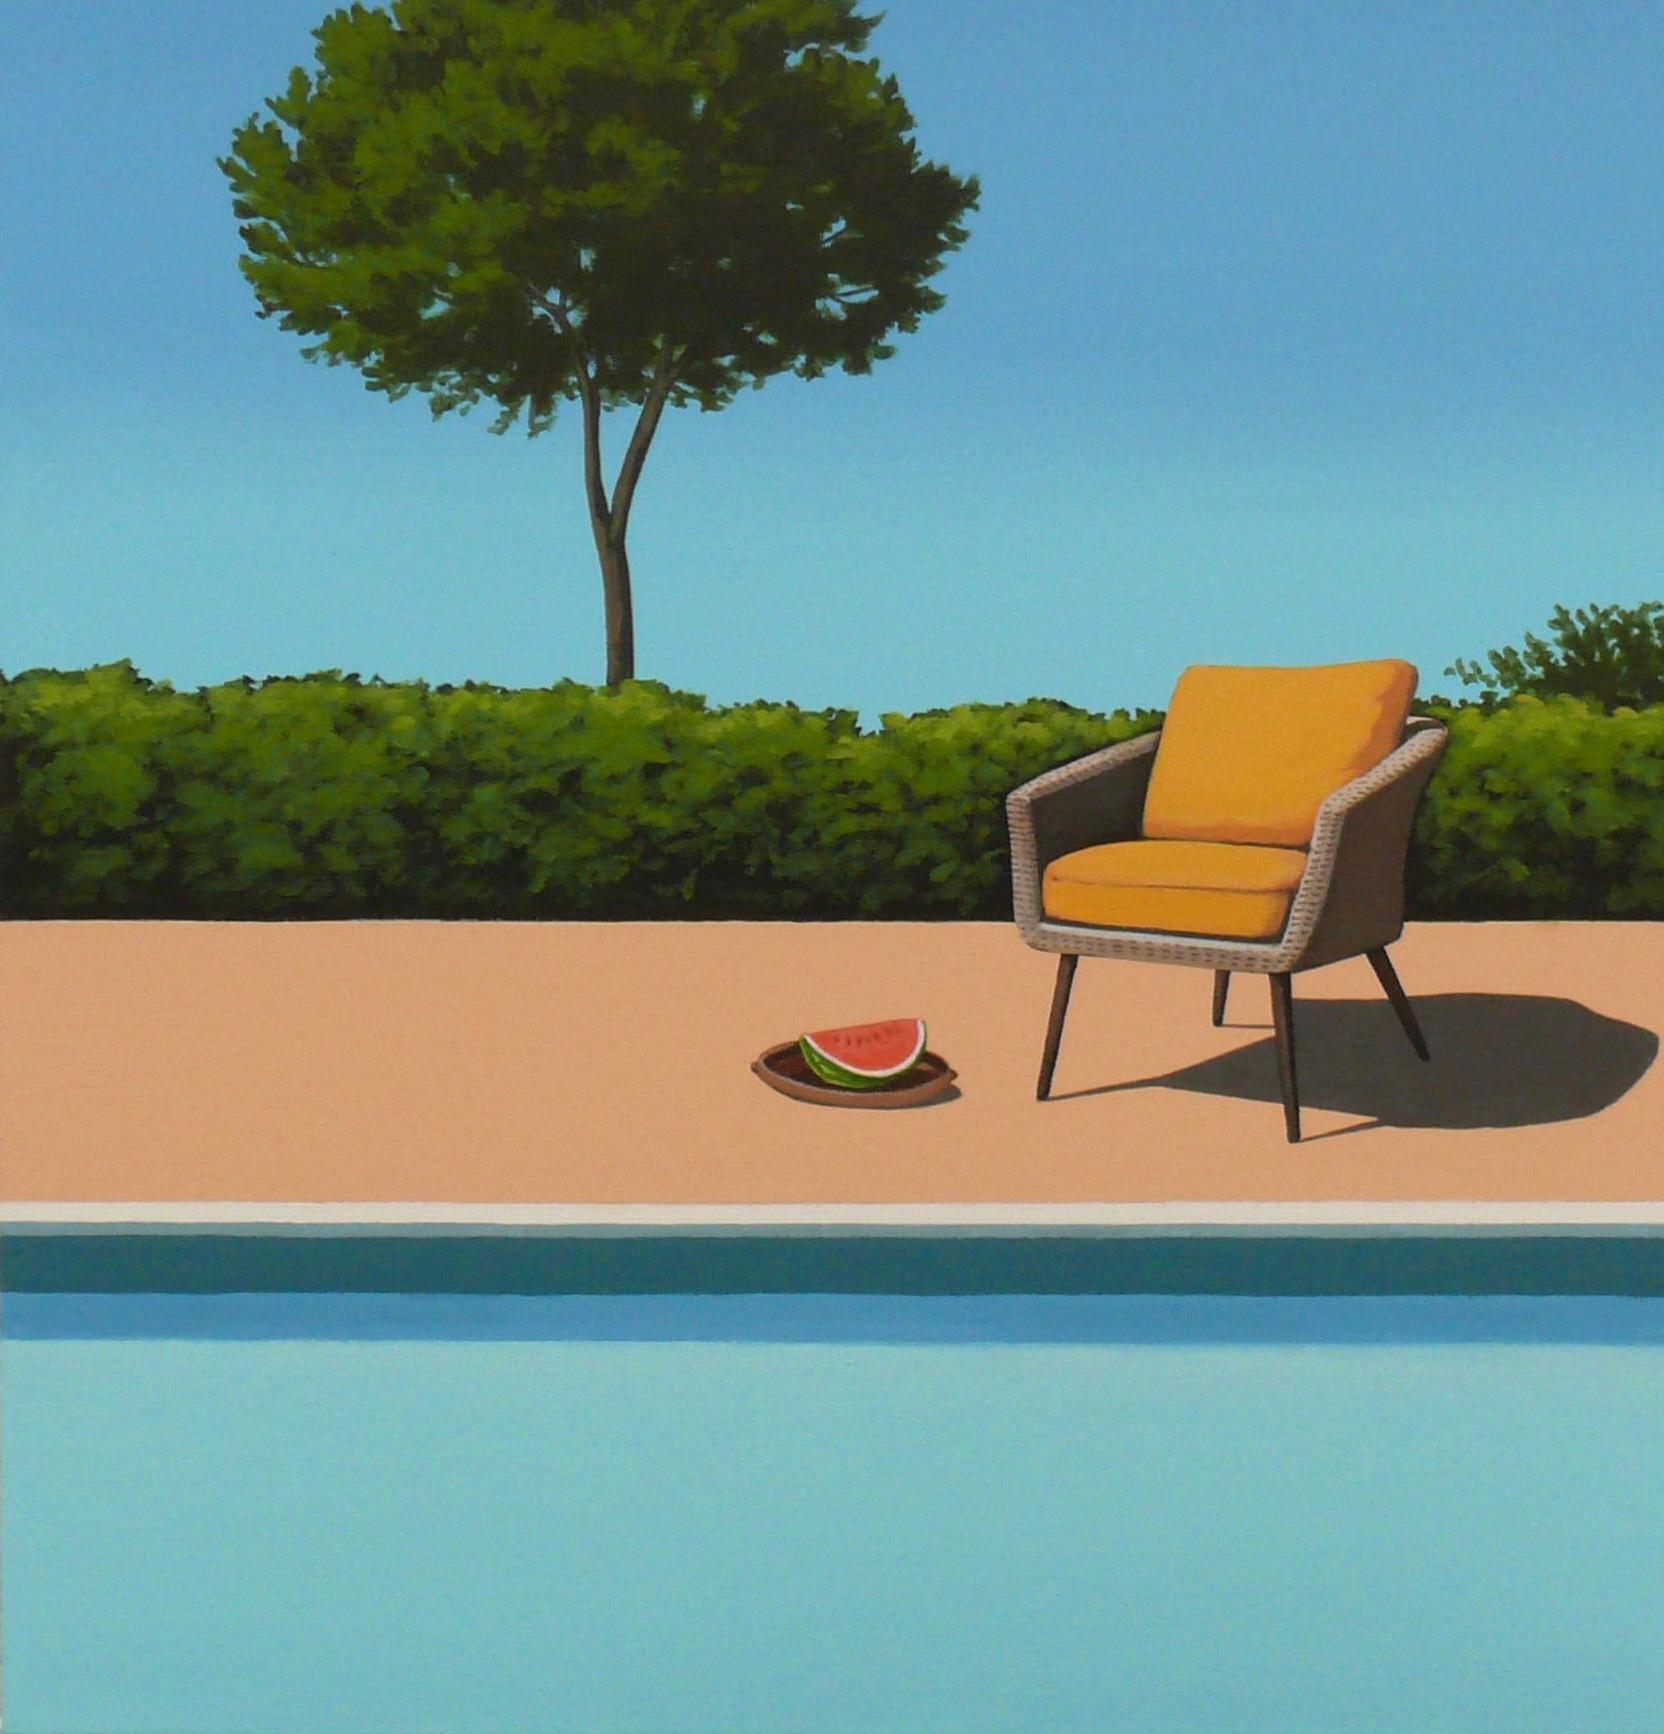 Watermelon by the pool - landscape painting - Painting by Magdalena Laskowska